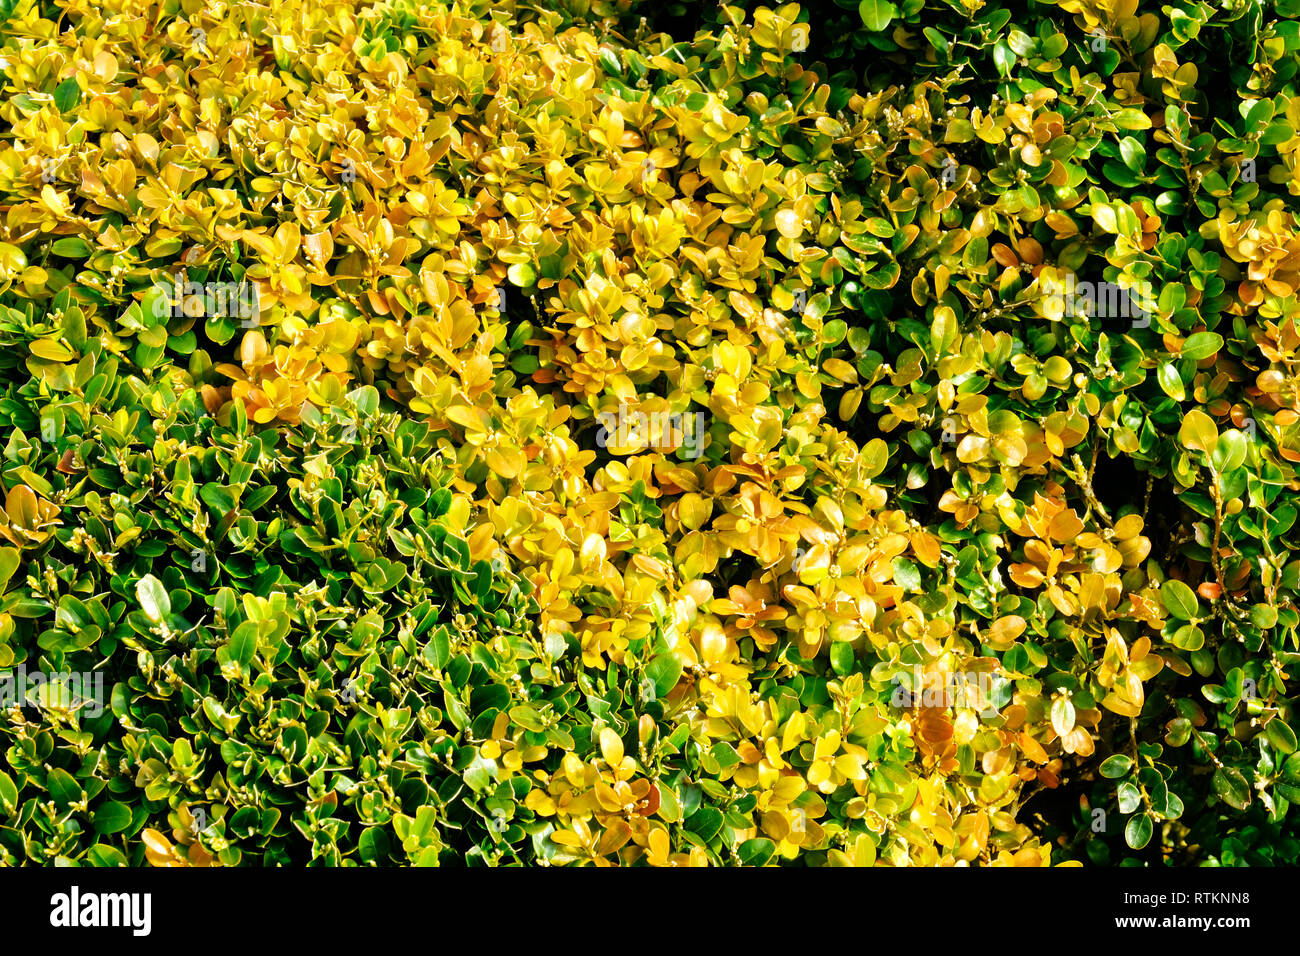 Close-up of box hedging showing the first signs of blight - John Gollop Stock Photo